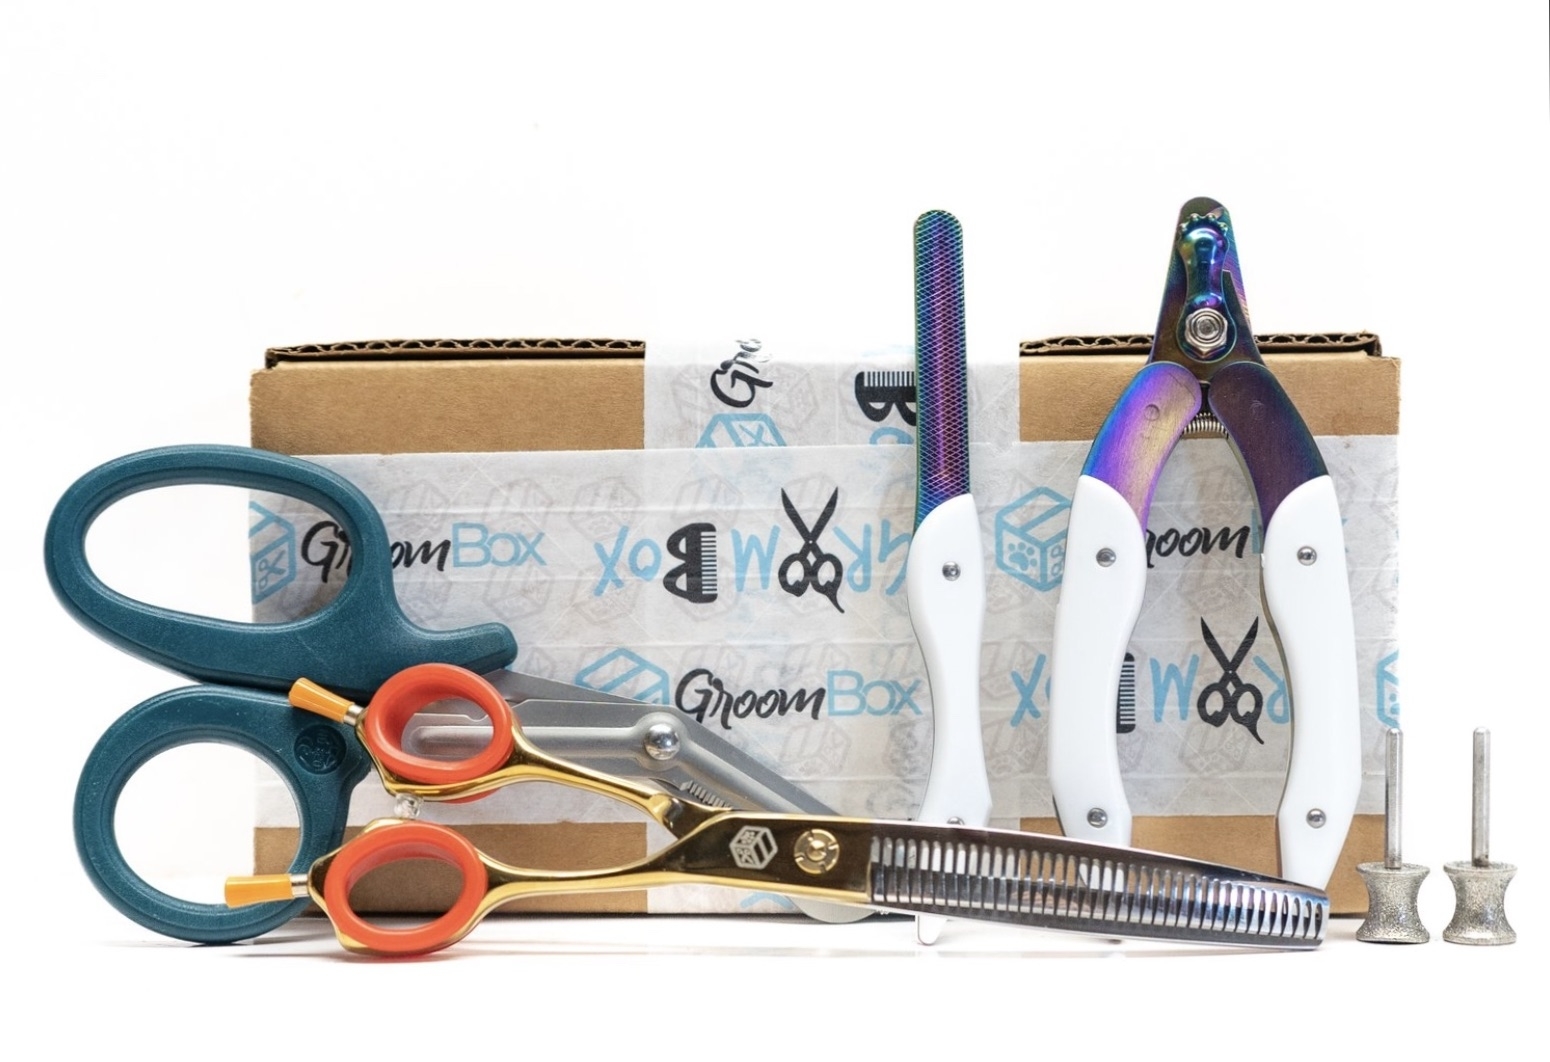 The shears and grooming tools that come in the box